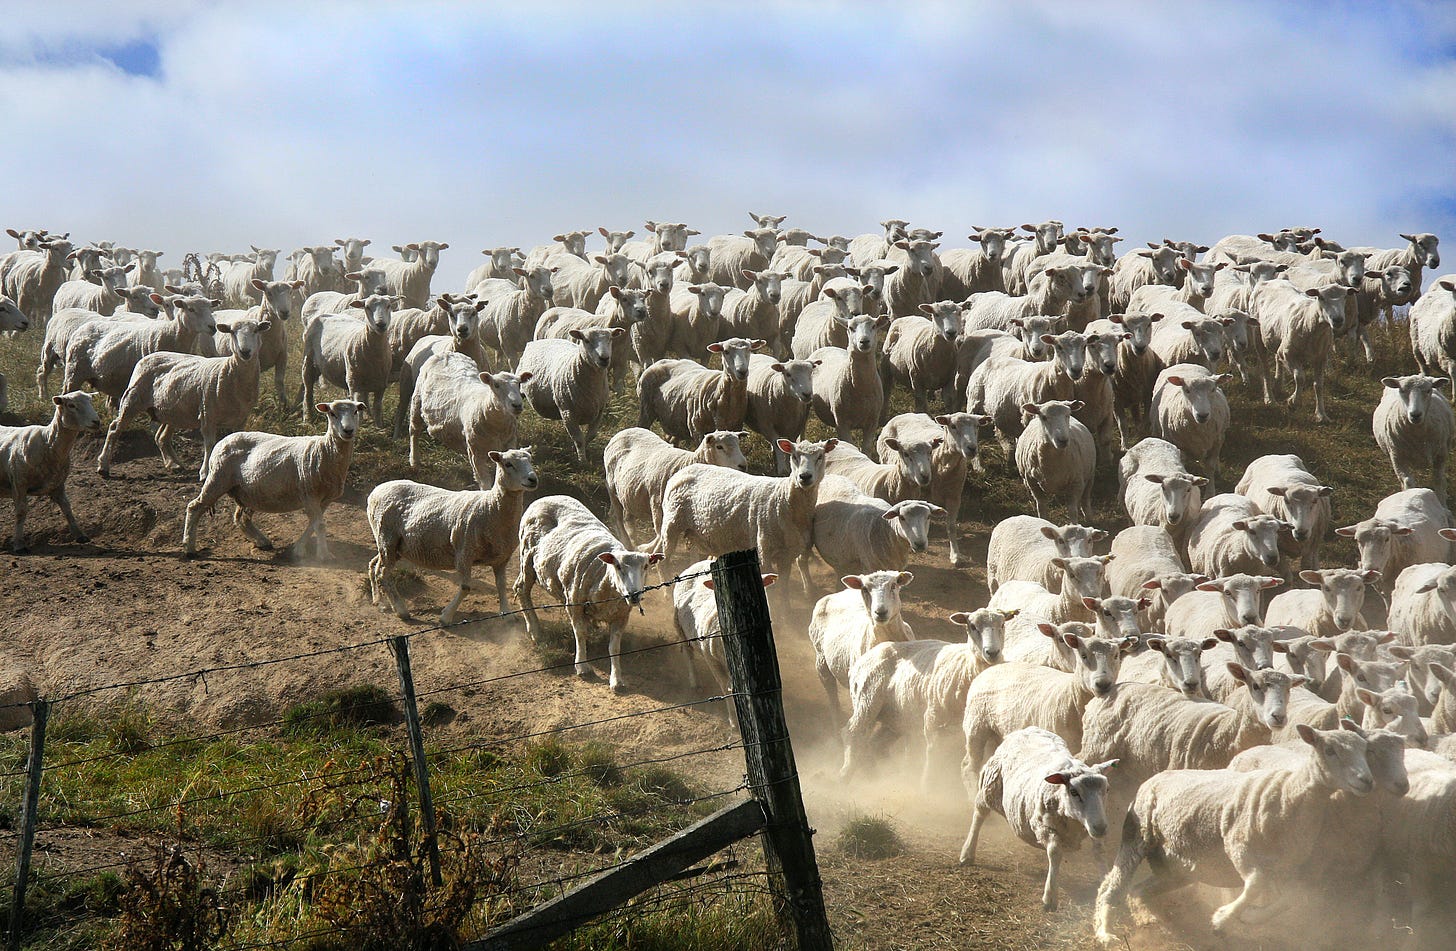 A flock of sheep running througha gap in a wire fence